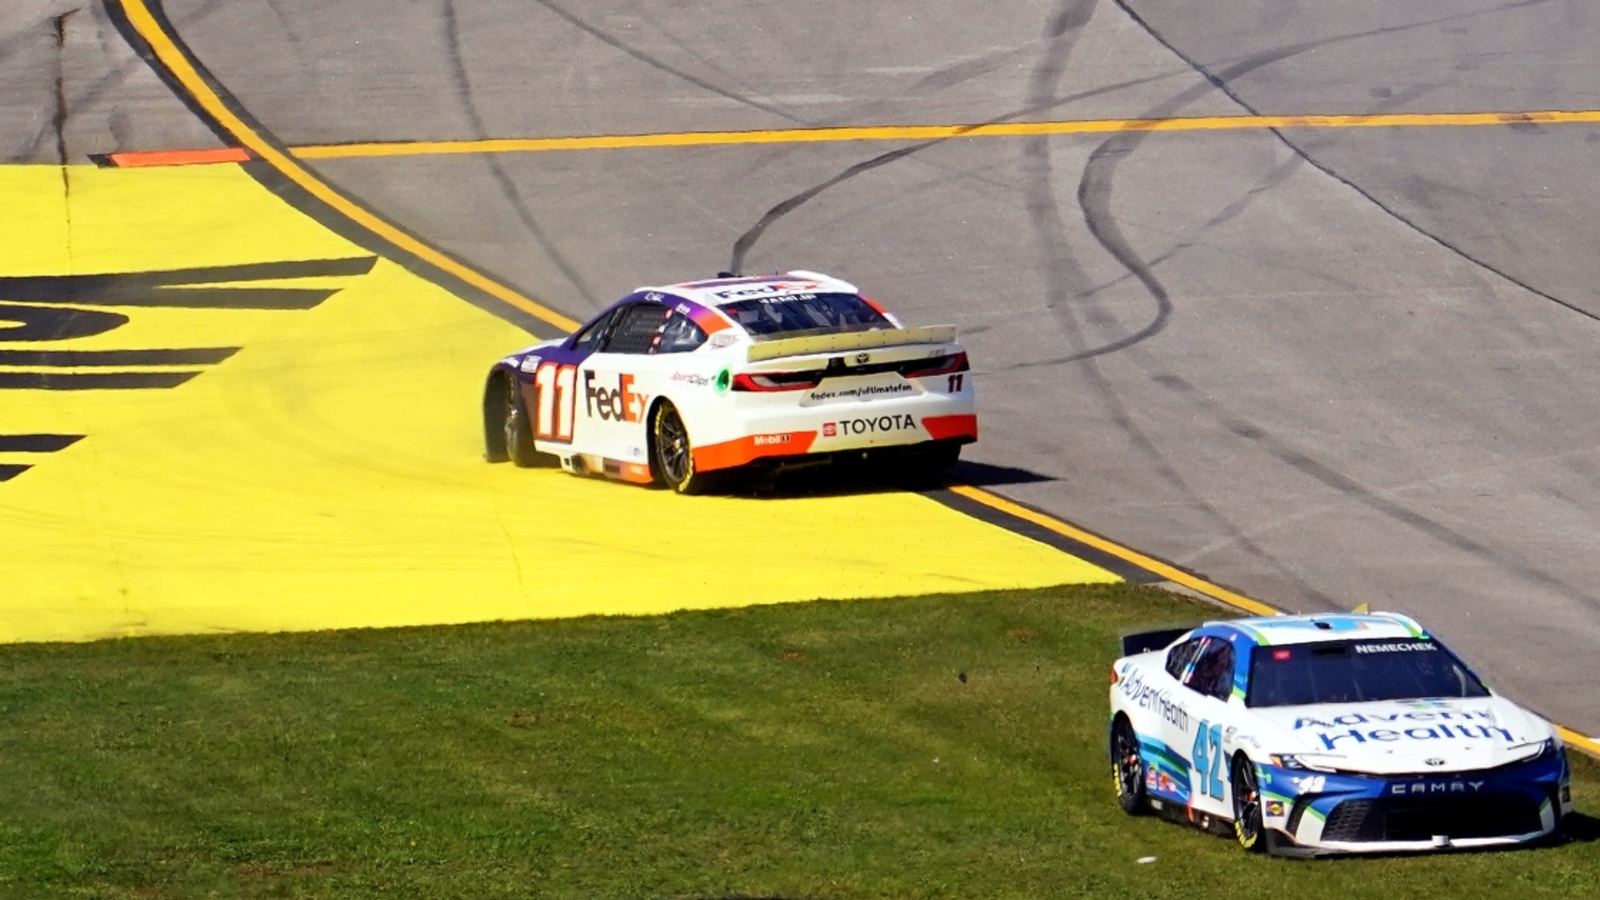 Denny Hamlin opens up about pit road puddles at Talladega, explains why he spun out